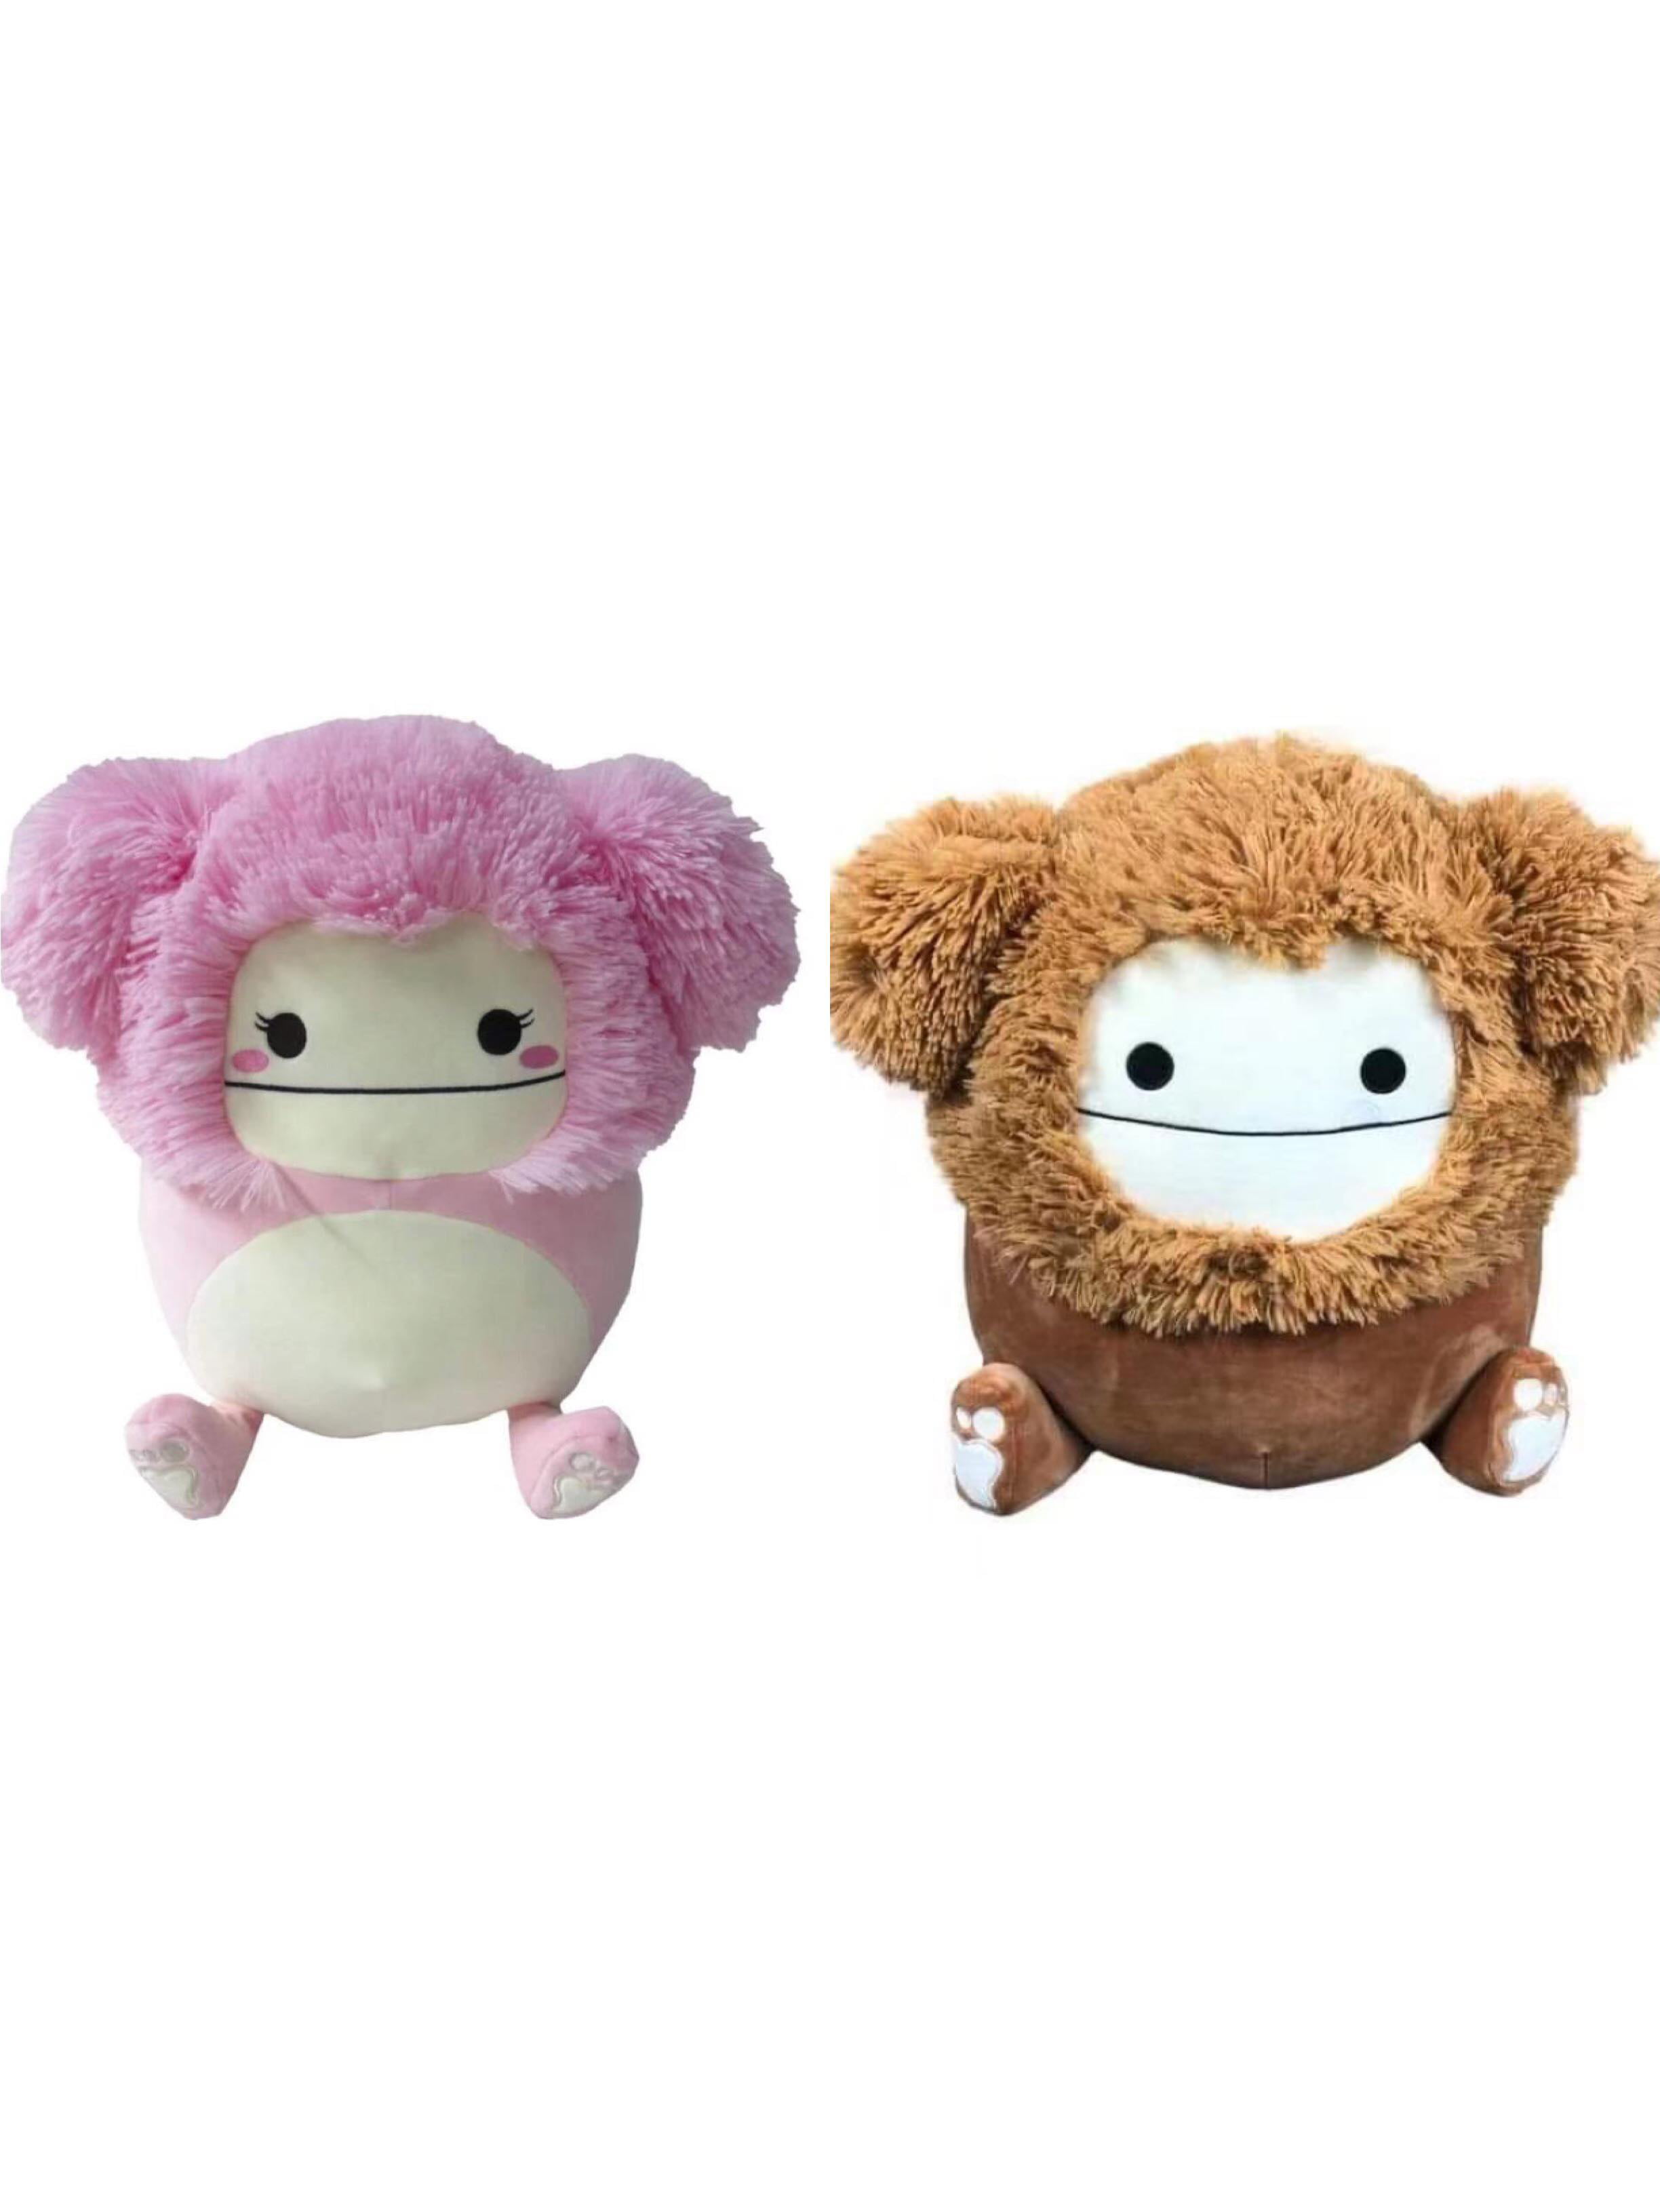 Squishmallow Brina Big Foot 20 inch Stuffed Animal for sale online 